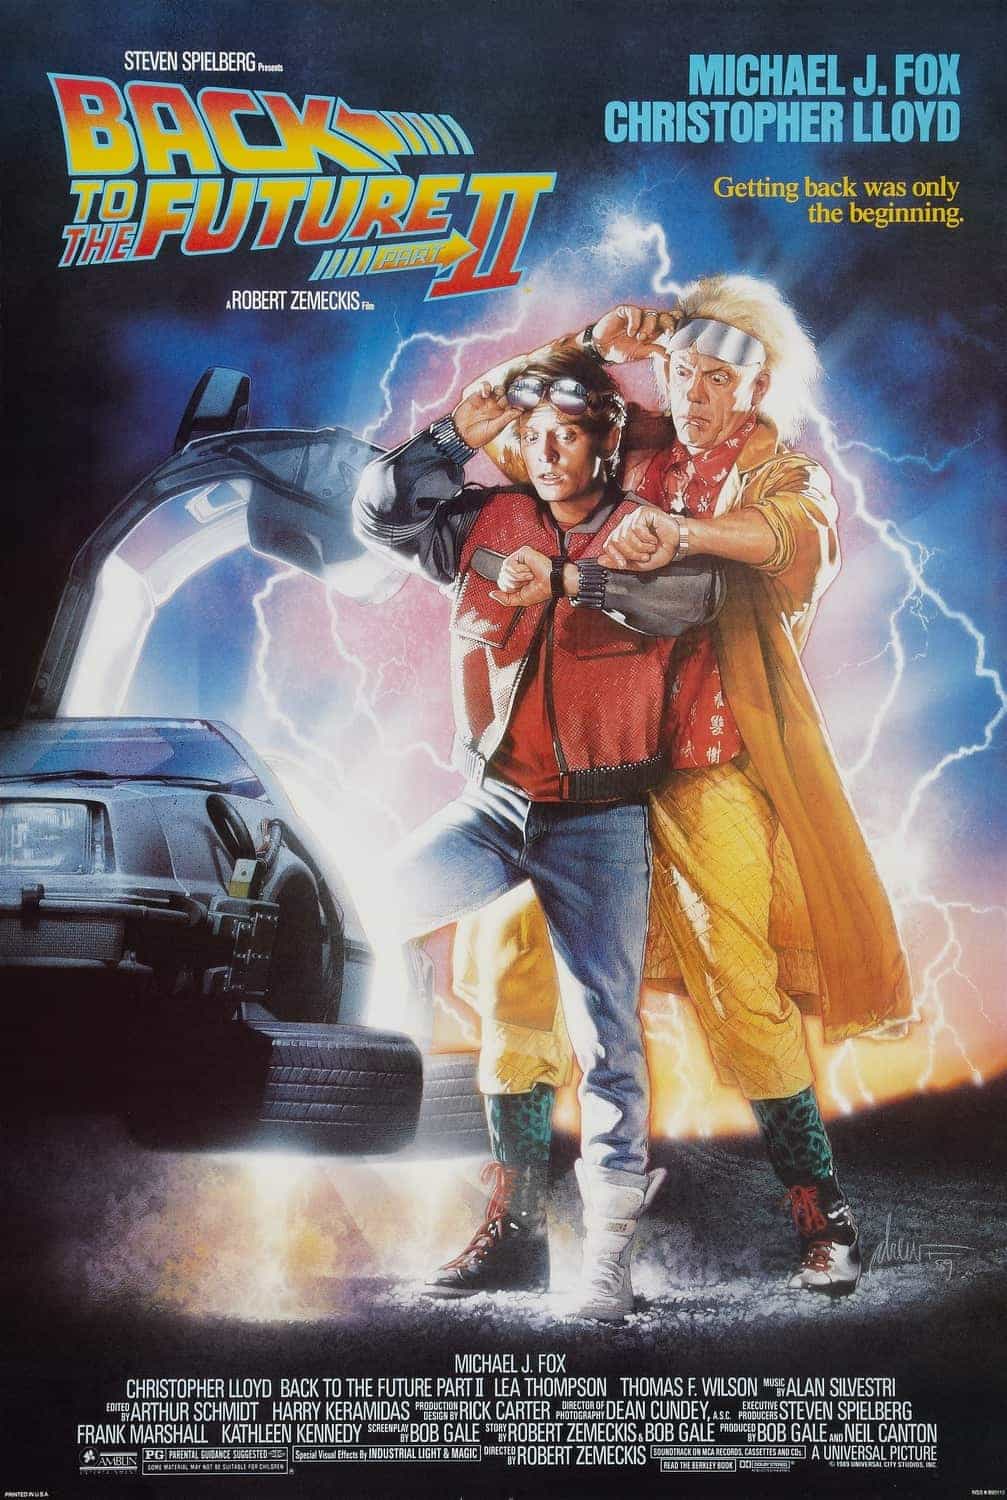 The single day re-release of Back To The Future Part II is on 21st October, Universal release trailer for Jaws 19 - get the joke!